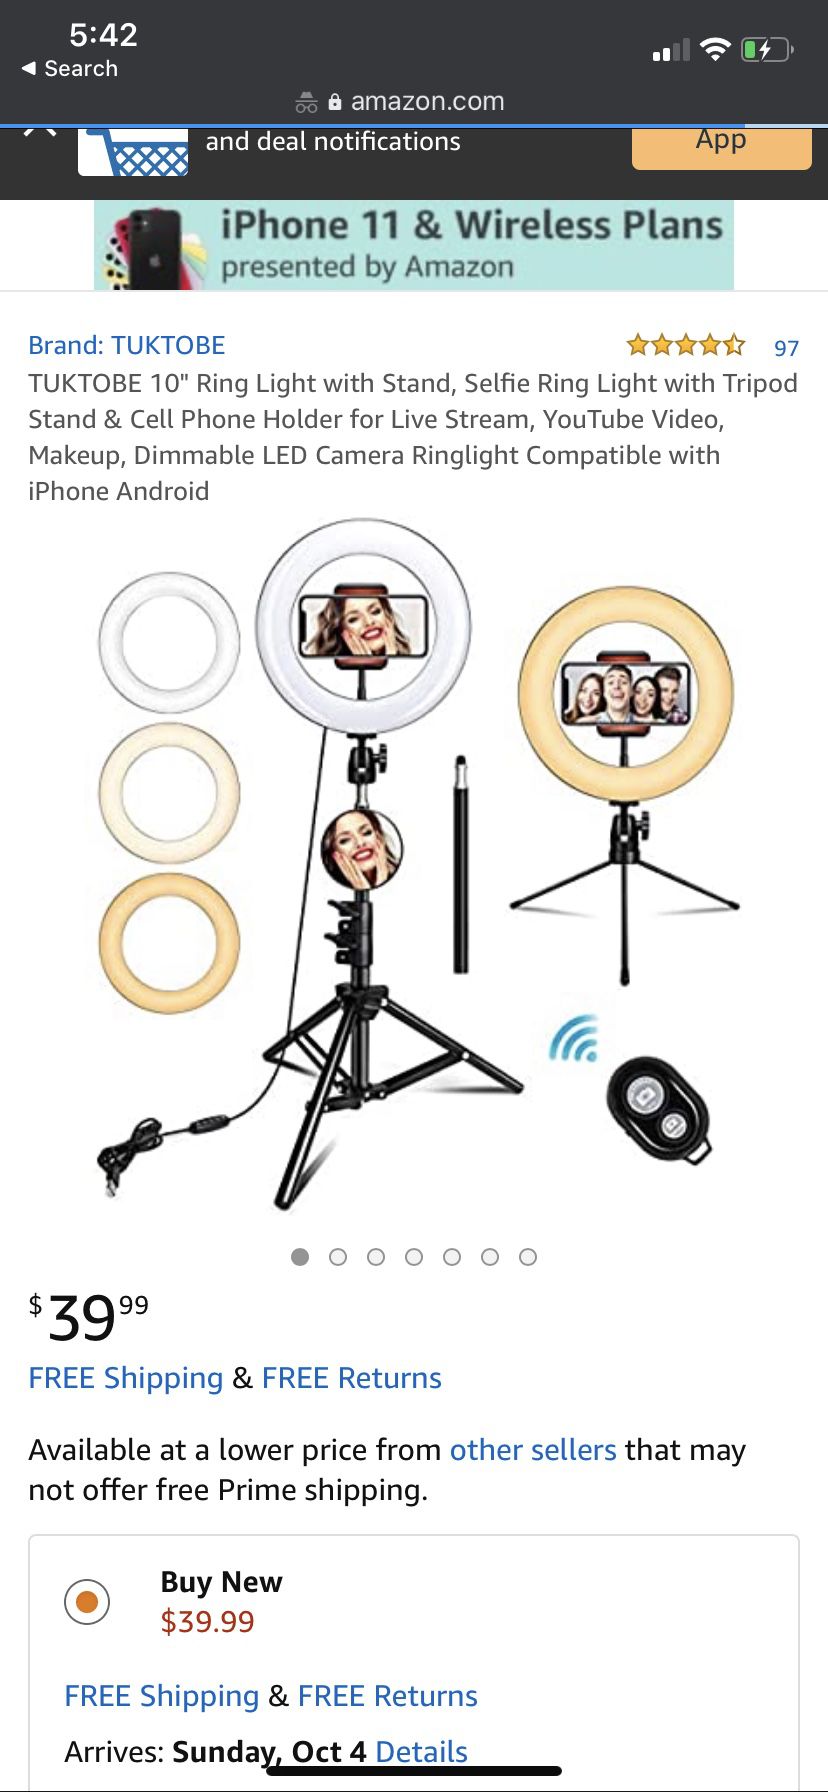 10" Ring Light with Stand, Selfie Ring Light with Tripod Stand & Cell Phone Holder for Live Stream, YouTube Video, Makeup, Dimmable LED Camera Ringli